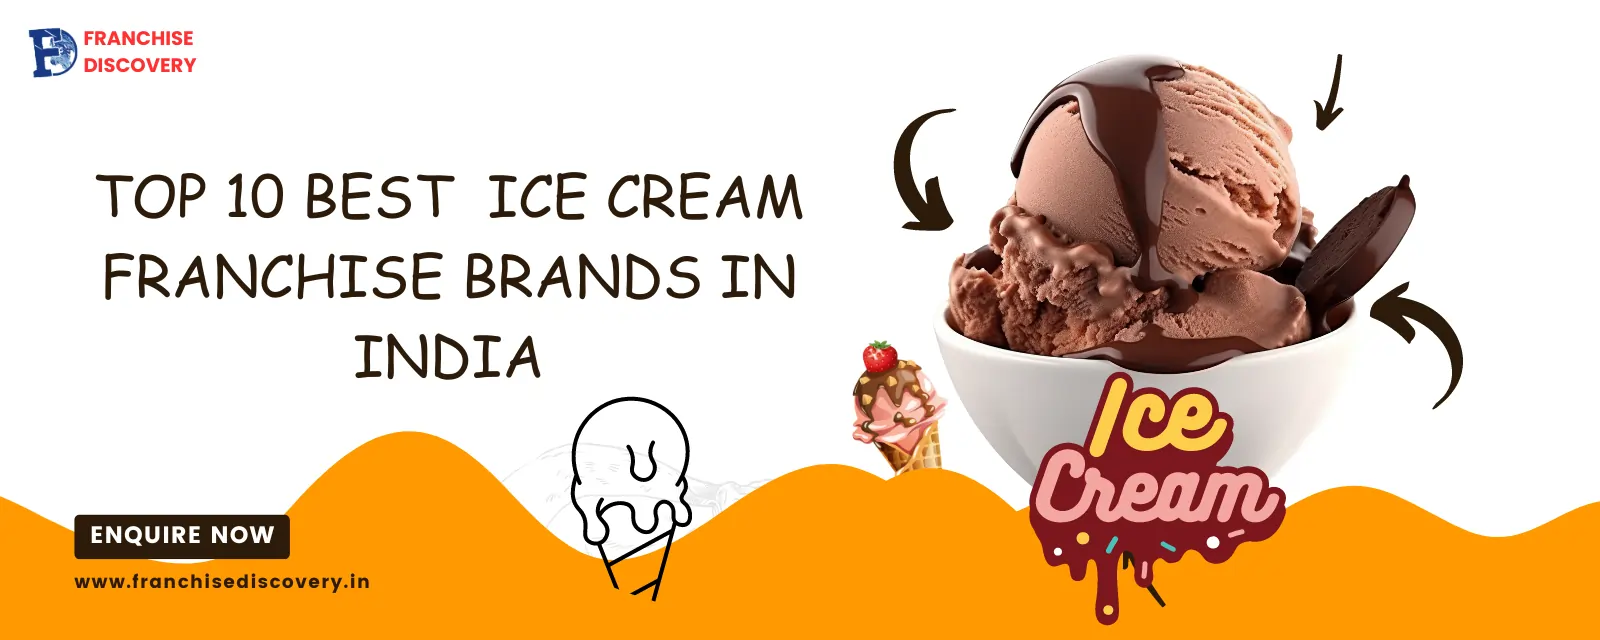 Top 10 best ice cream franchises brands in India - Setup cost & process | Pros and Cons 